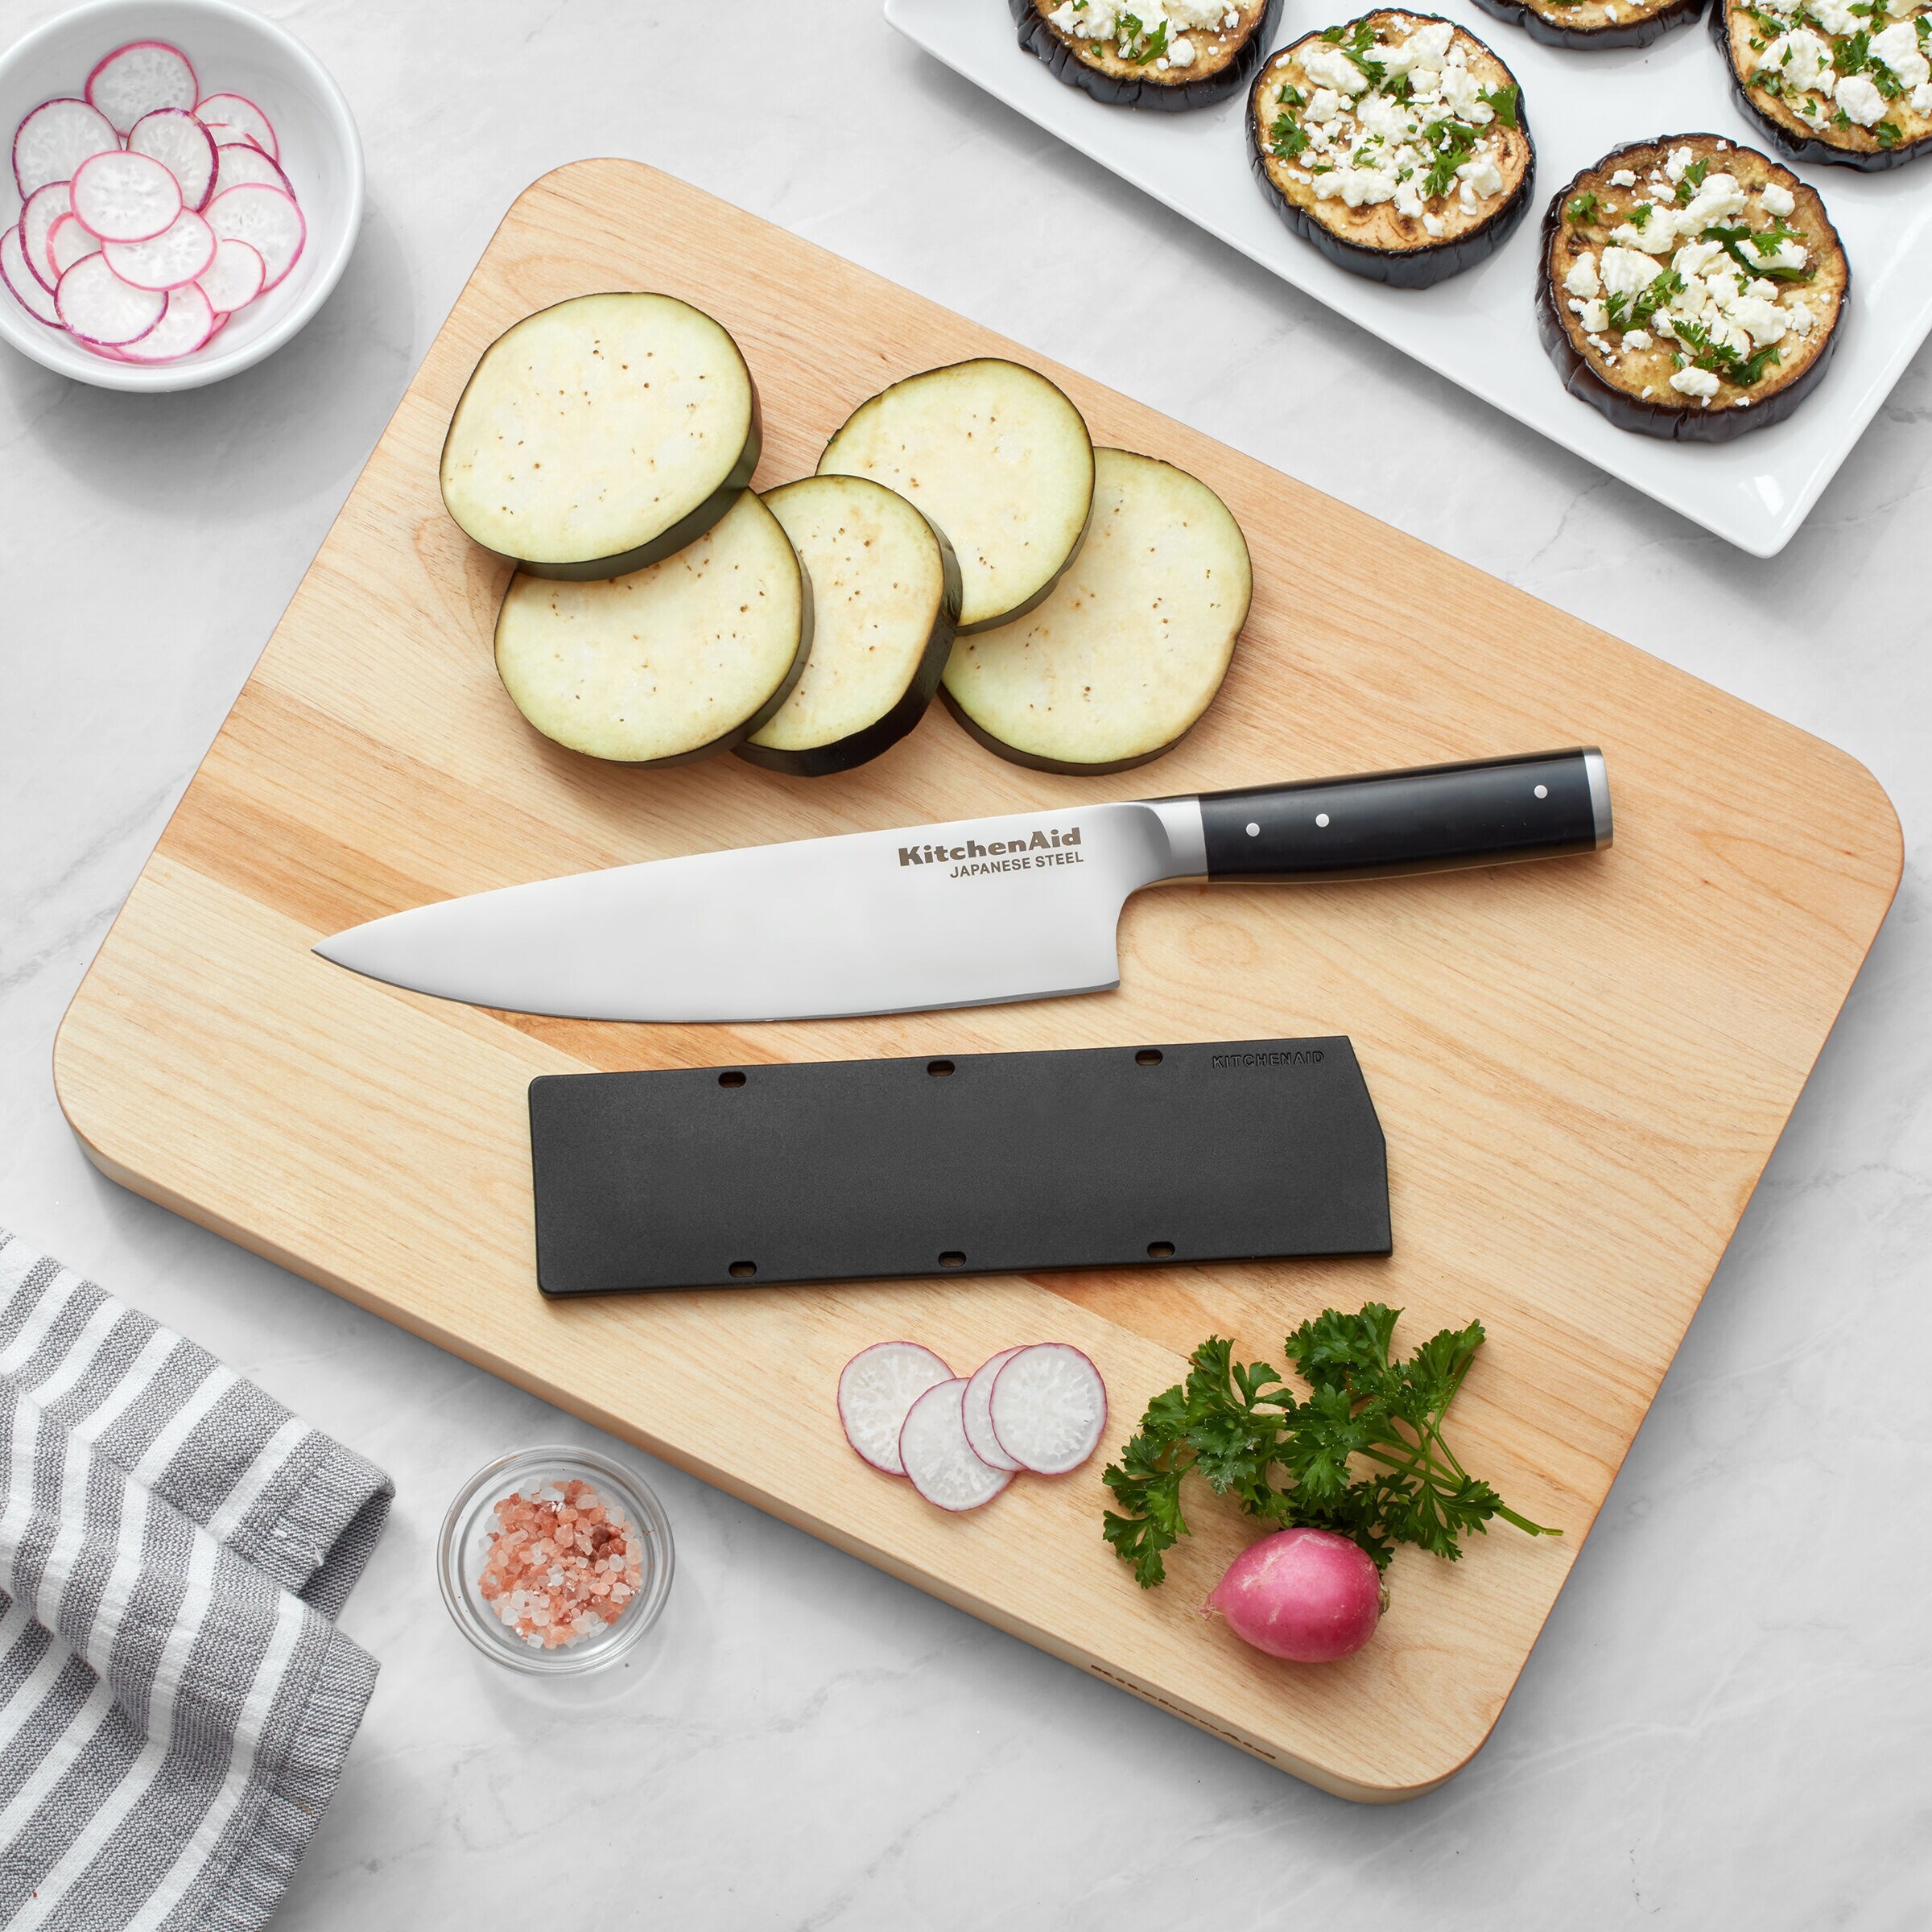 KitchenAid Classic Paring Knife with Endcap and Custom-Fit Blade Cover,  3.5-inch, Sharp Kitchen Knife, High-Carbon Japanese Stainless Steel Blade